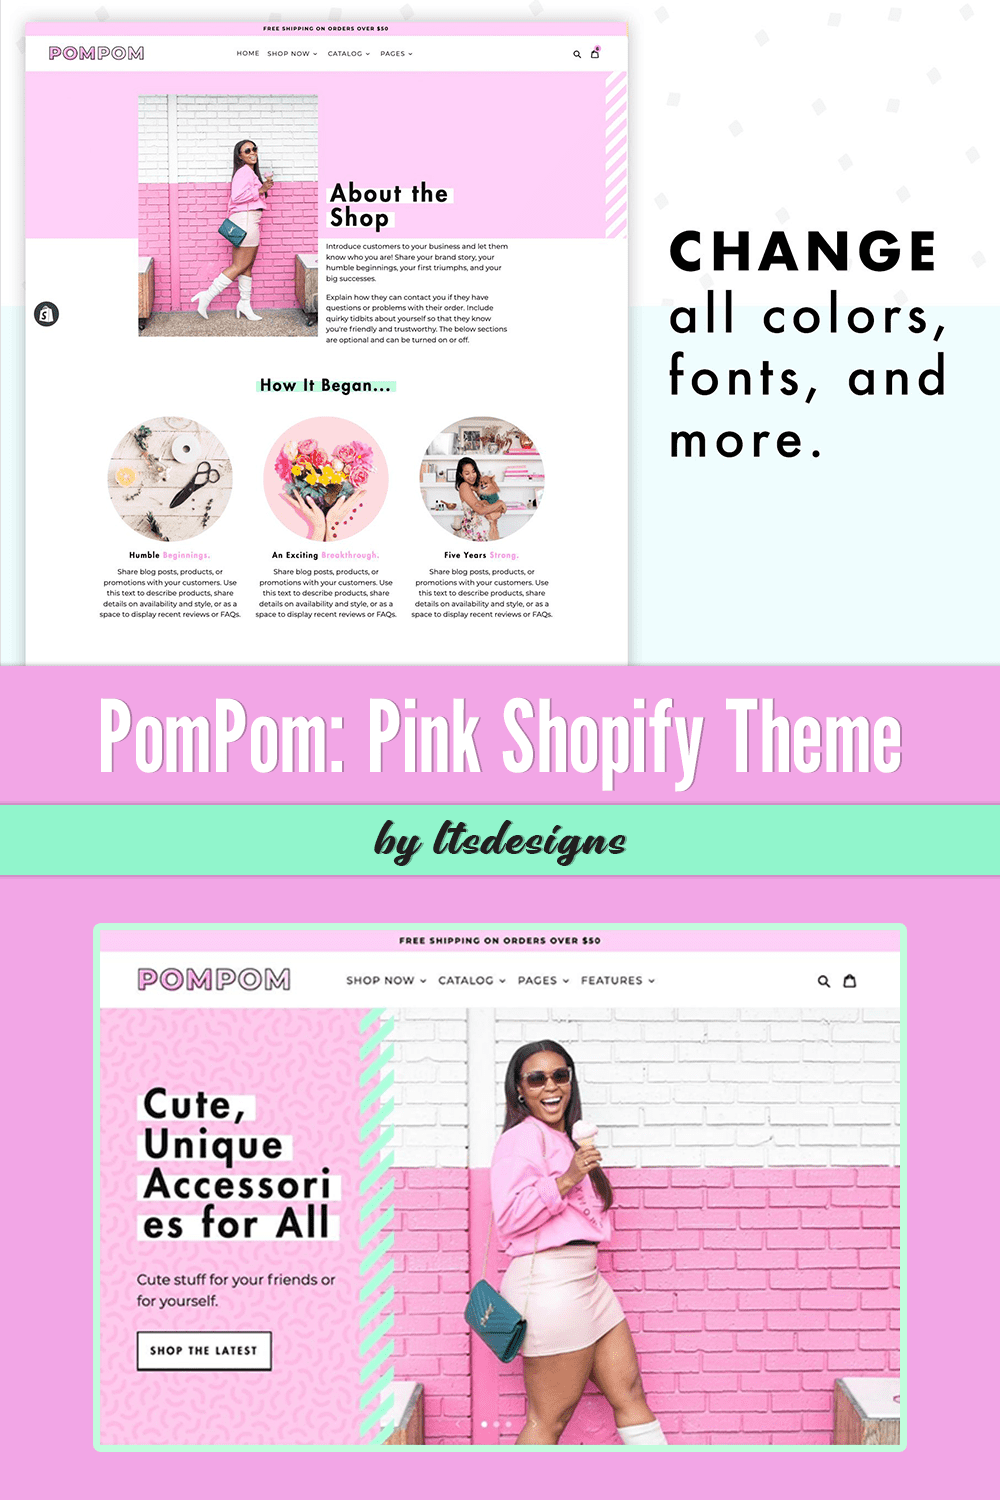 An image of a beautiful Shopify theme in pink colors.